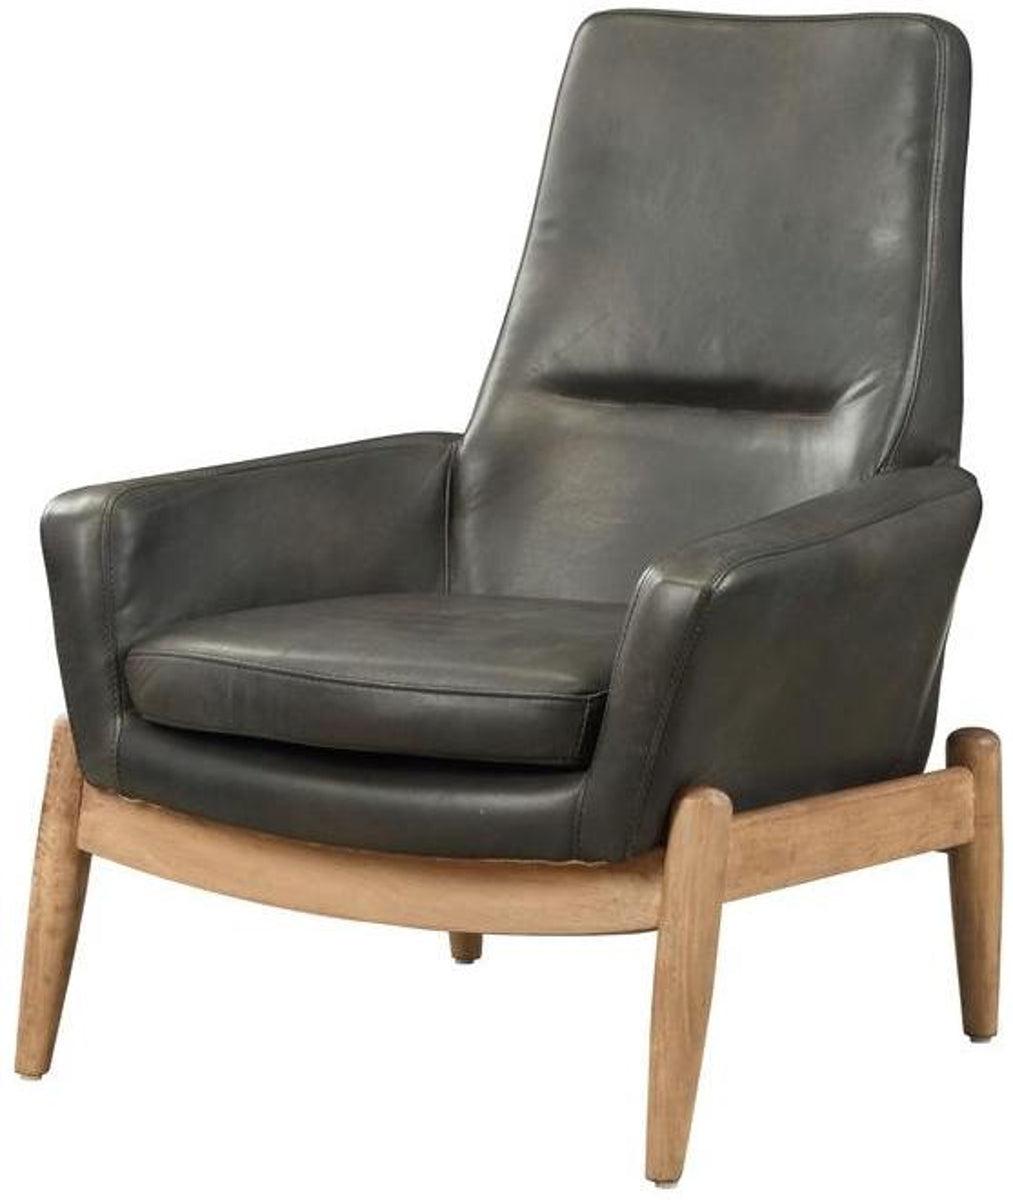 Acme Dolphin Accent Chair in Black 59533  Las Vegas Furniture Stores